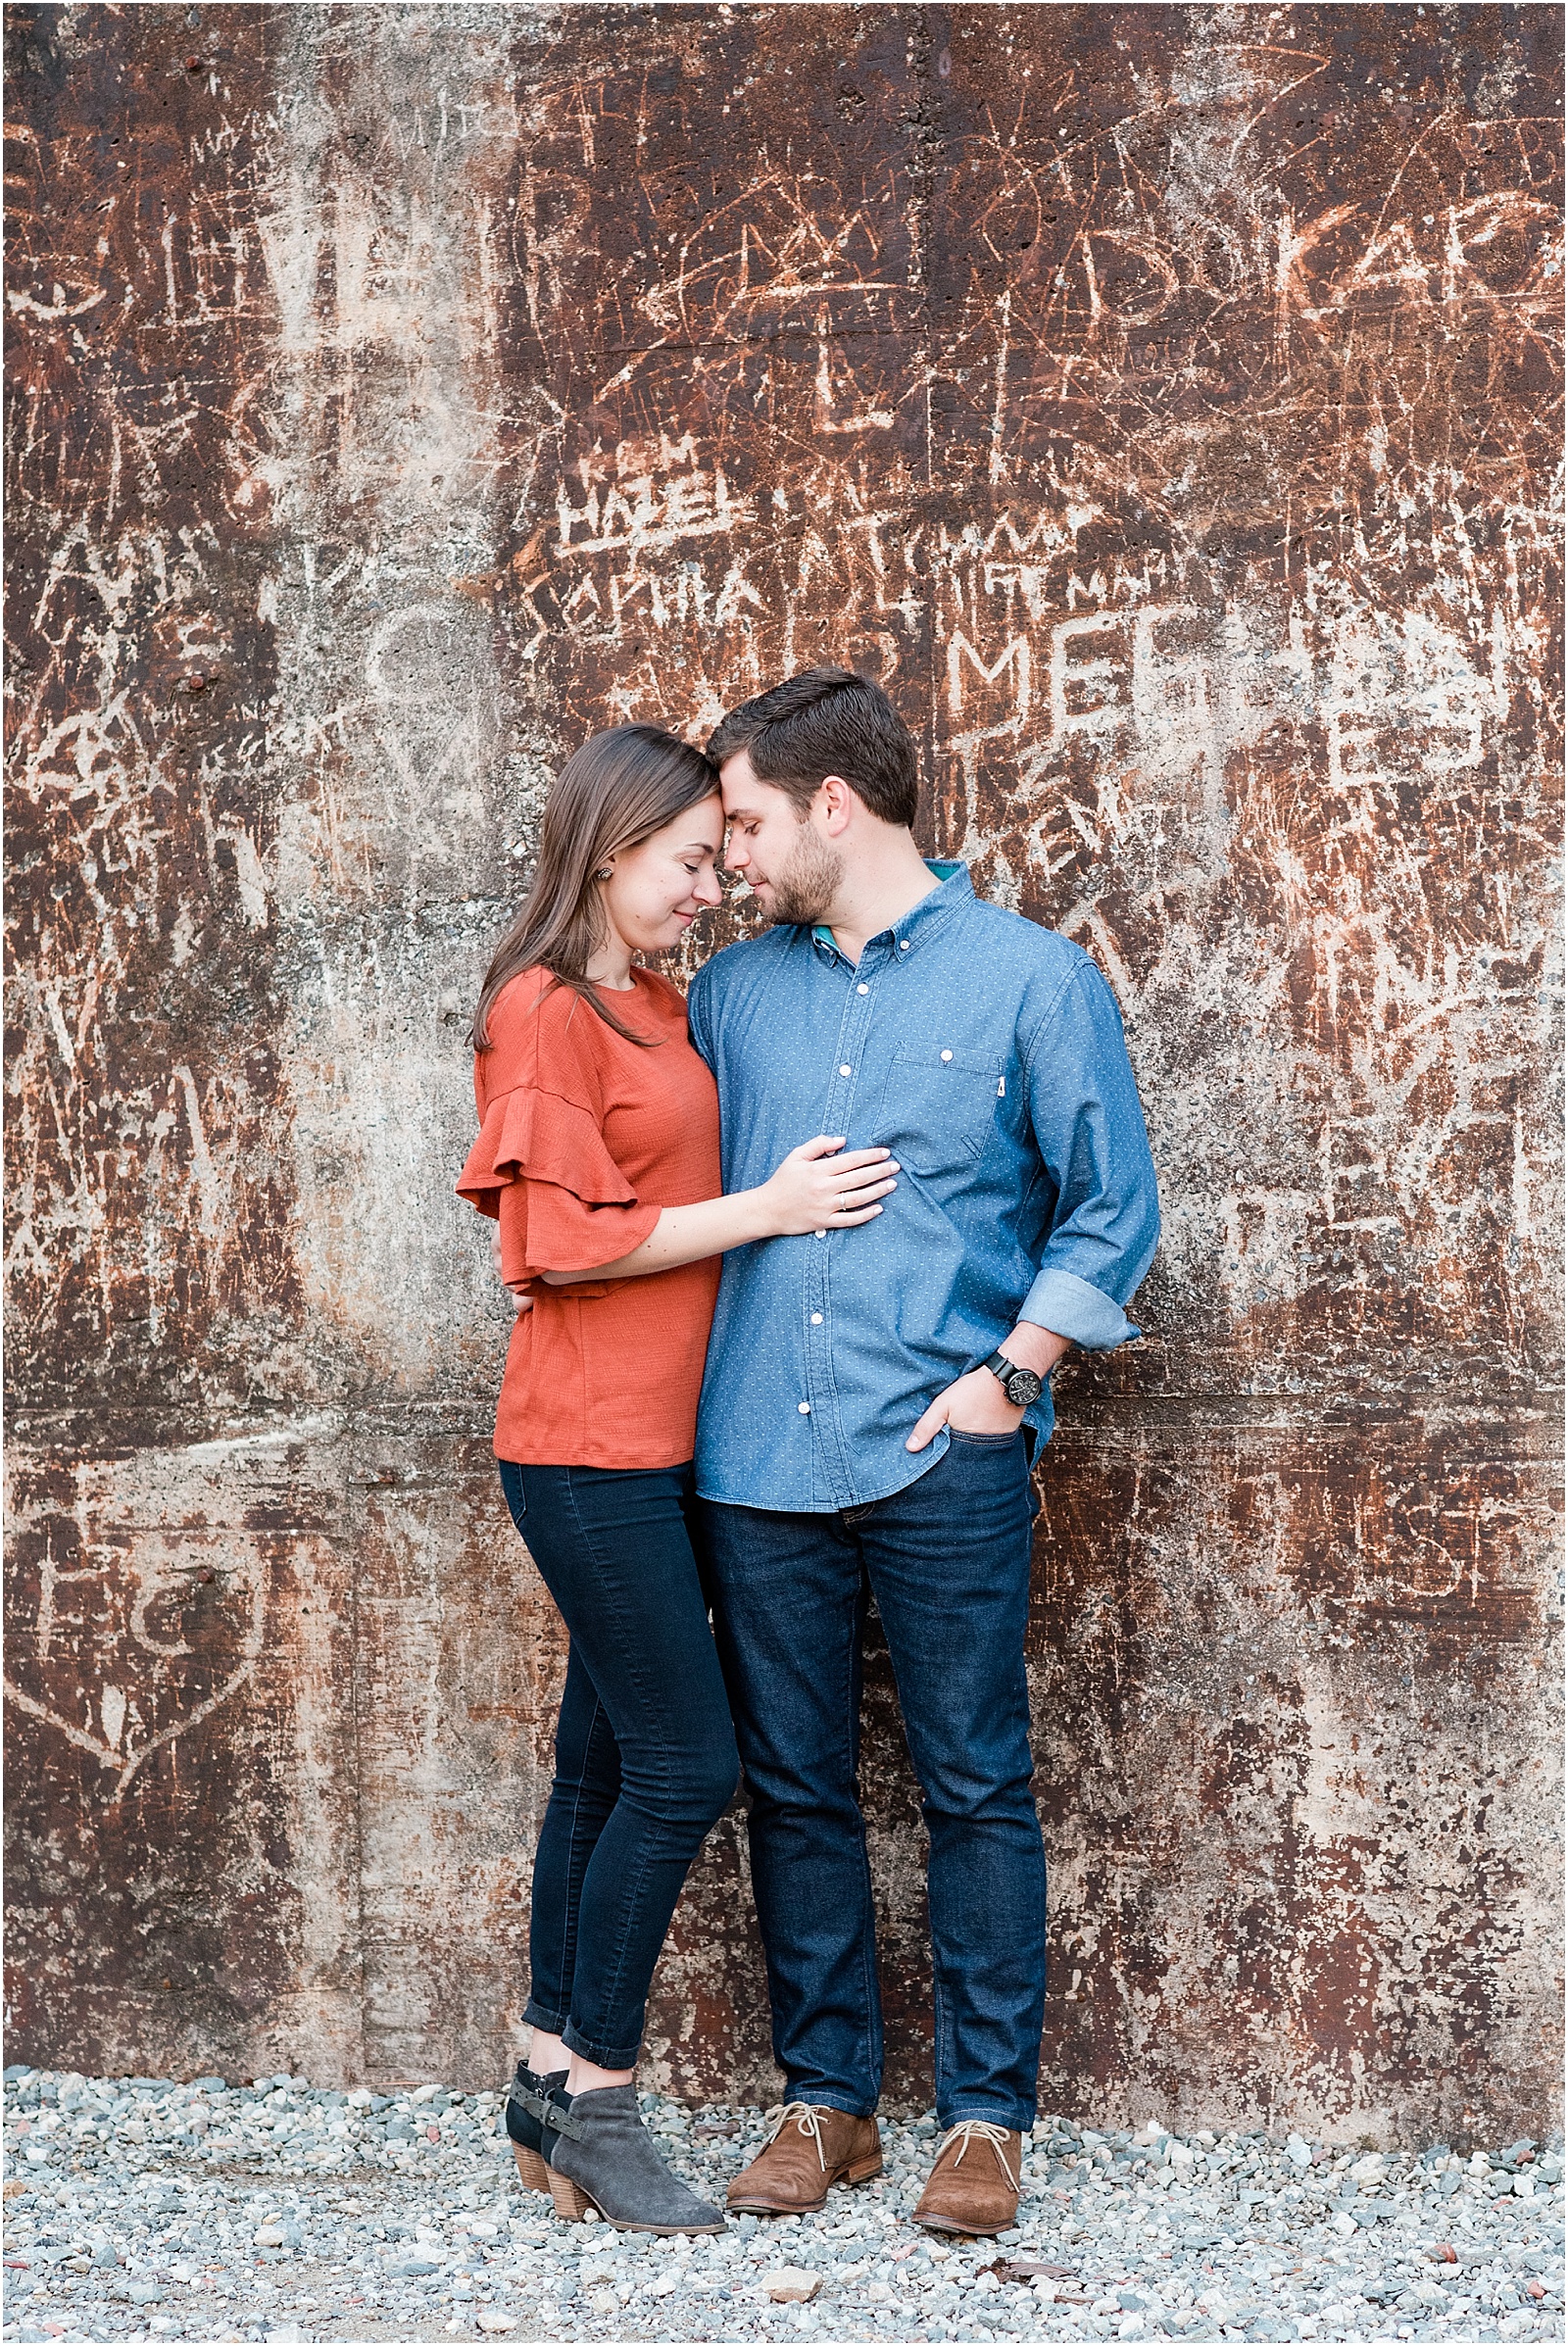 michelle and sara photography, saxapahaw, the rivermill lofts, chic engagement outfit, chic engagement session, saxapahaw engagement session, navy blue suit, brick arched backgroung, north carolina engagement, nc engagement, nc engagement photographer, 2018 bride, 2018 wedding